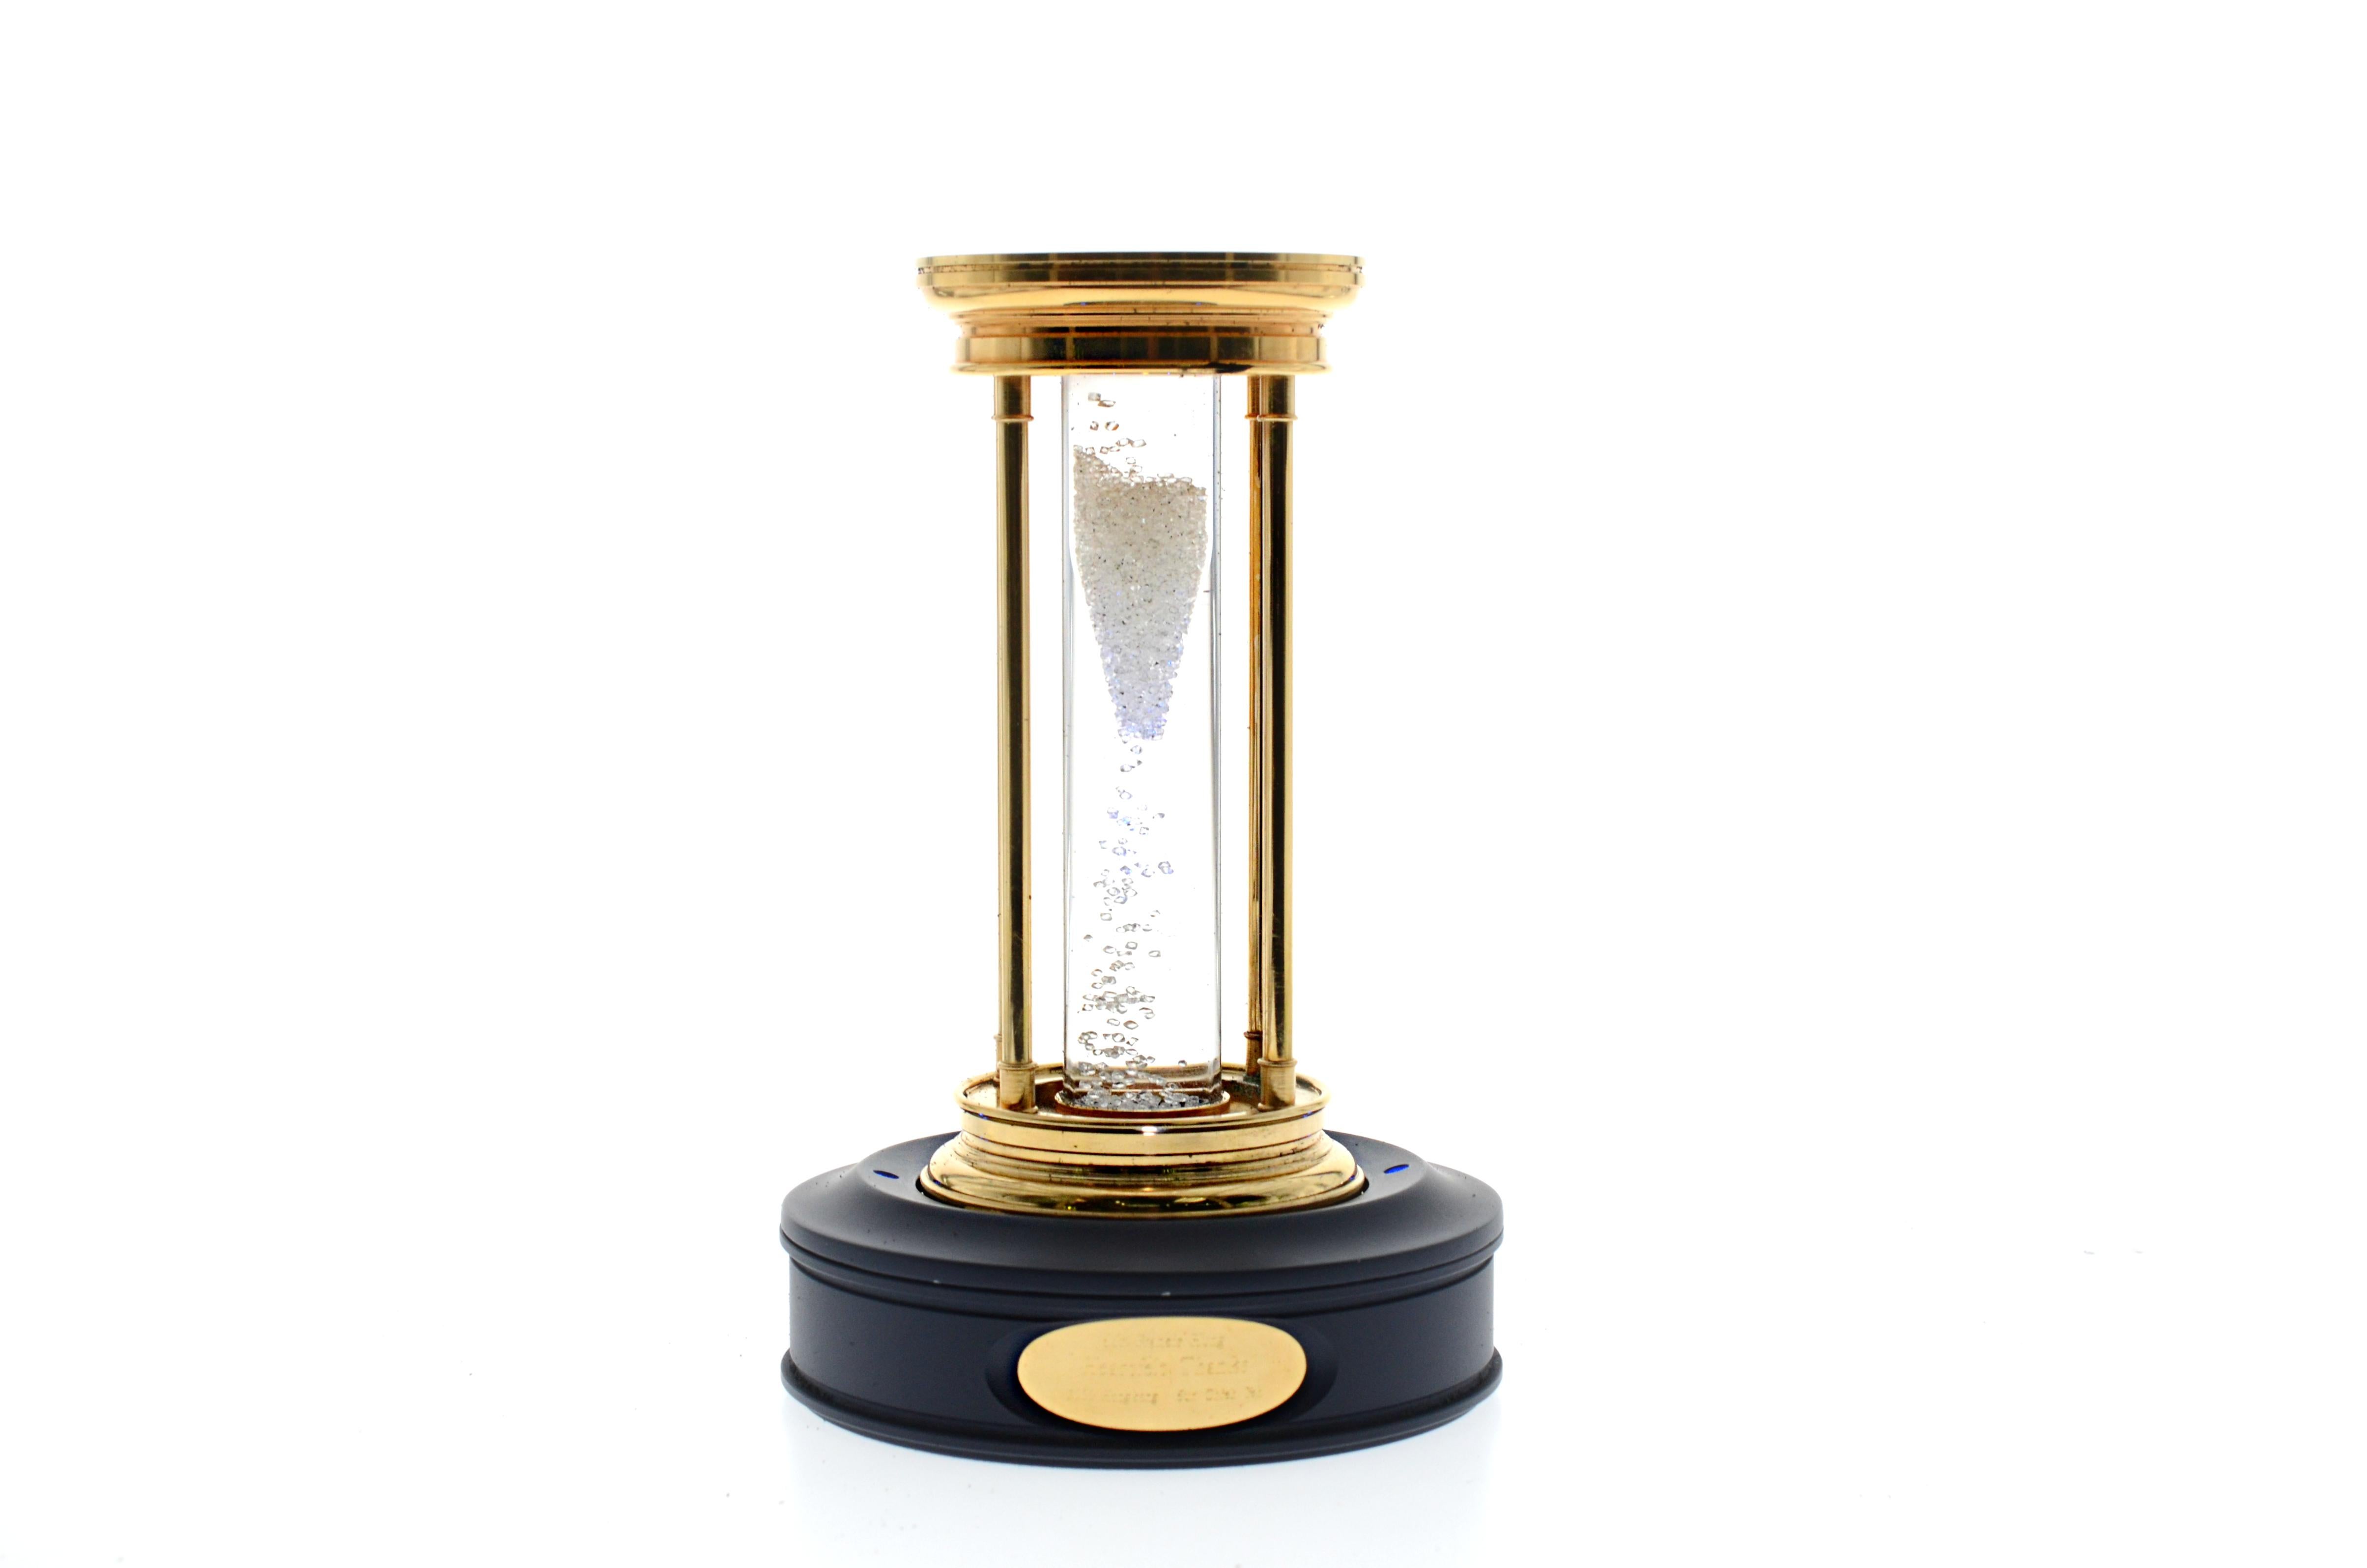 A limited edition diamond hourglass, by De Beers
Containing a cascade of over 2000 natural rough diamonds, weighing approximately 36 carats total, suspended in a silicone fluid, contained in a gold plated and acrylic reversible timer, duration